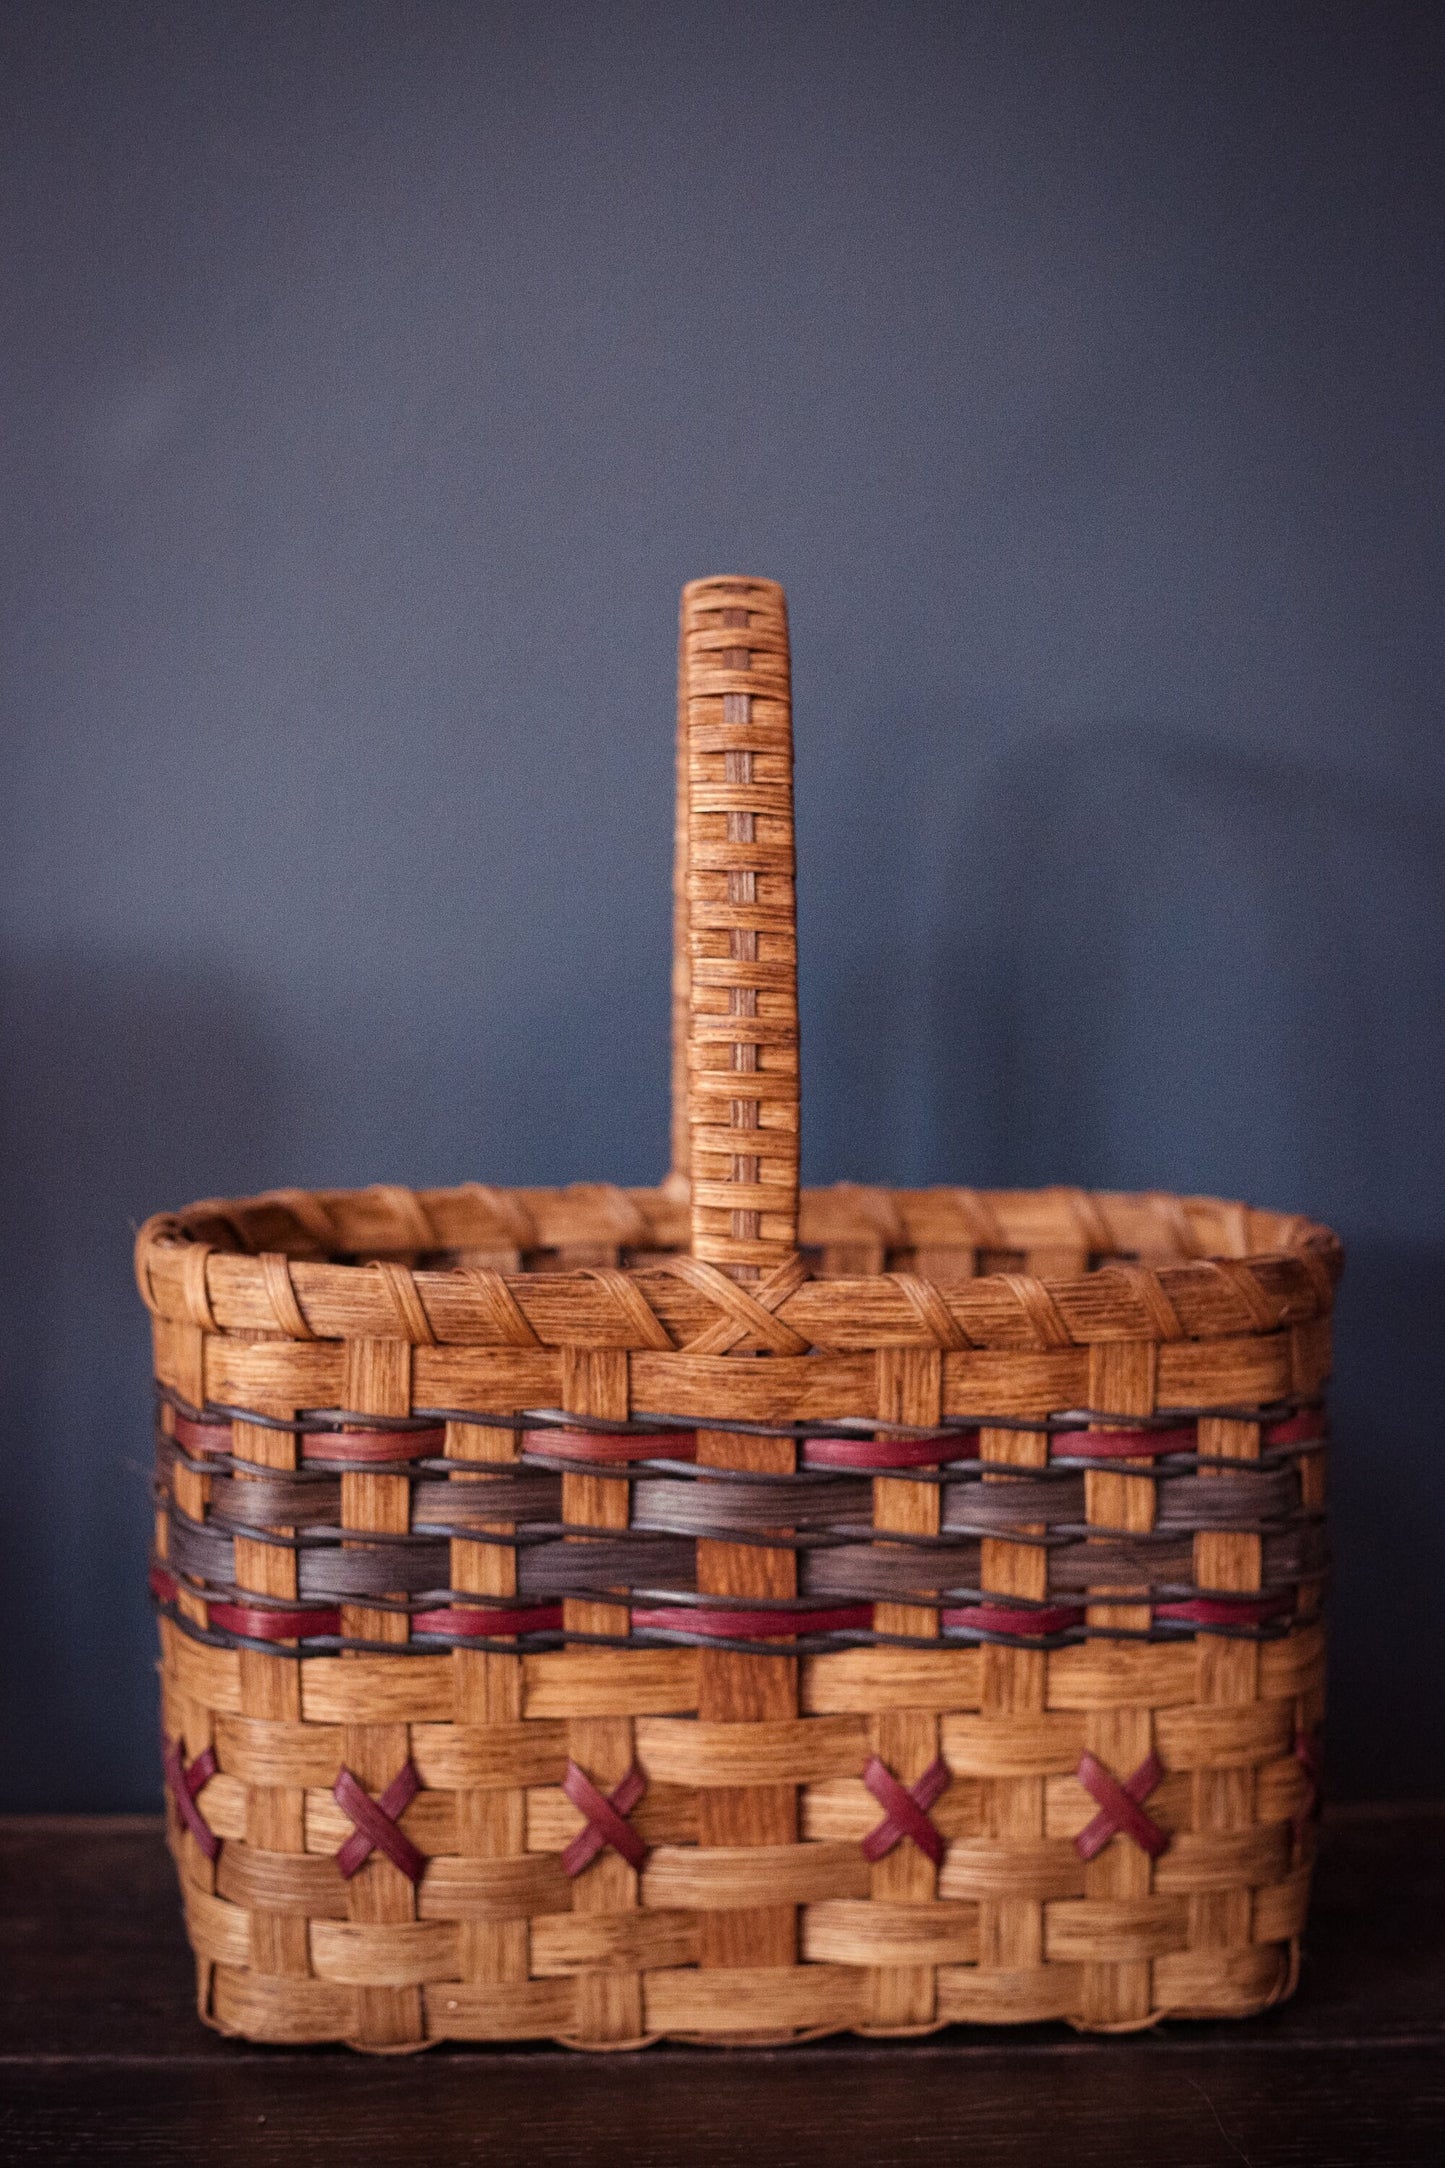 Narrow Rectangular Flat Bottom Dyed Splint Basket with Wood Handle and Red/Blue, Braided Accent - Woven Wood Amish Style Knitting Basket